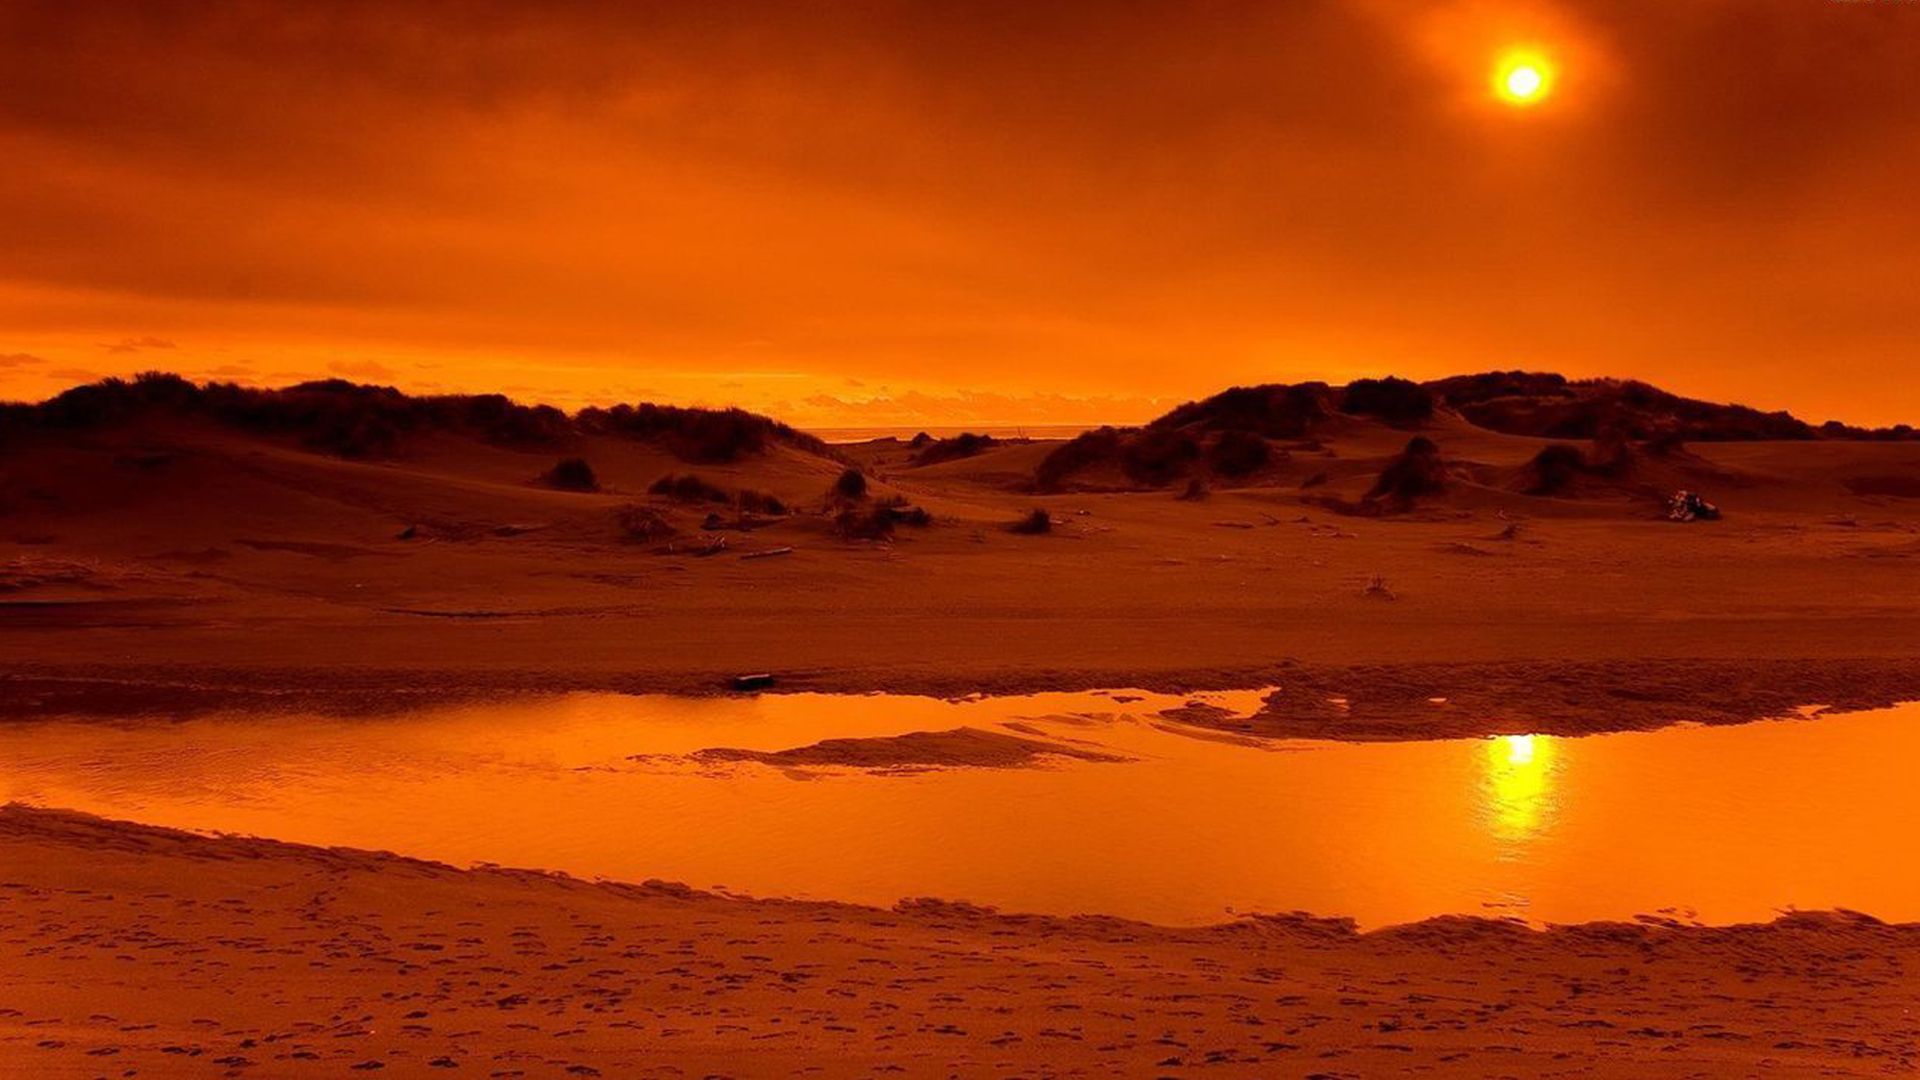 A sunset over a beach with sand dunes in the background - Orange, desert